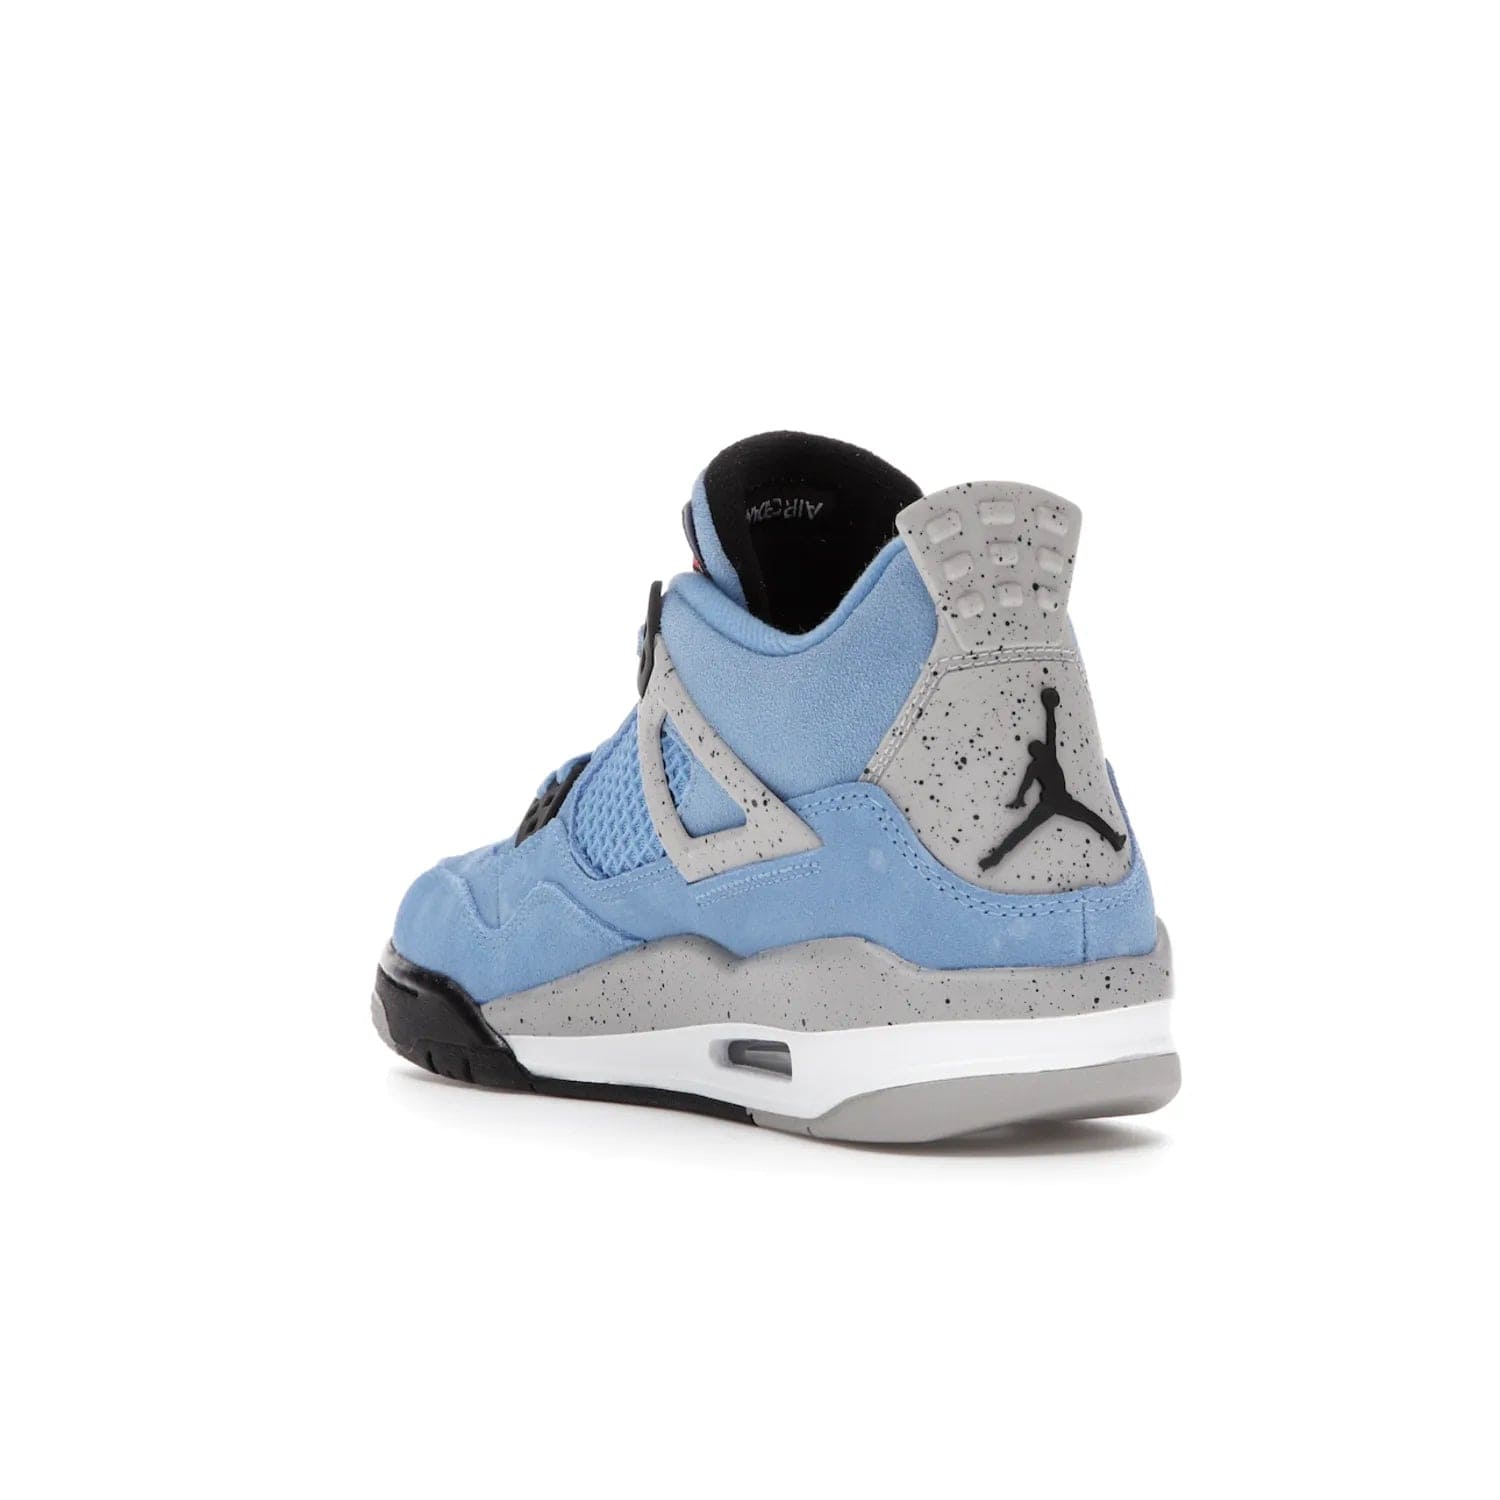 Jordan 4 Retro University Blue (GS) - Image 25 - Only at www.BallersClubKickz.com - Air Jordan 4 Retro University Blue GS: Classic silhouette and vibrant colors. Featuring a suede upper and Jumpman icon, this grade school-size shoe is perfect for collections and retails at $150.